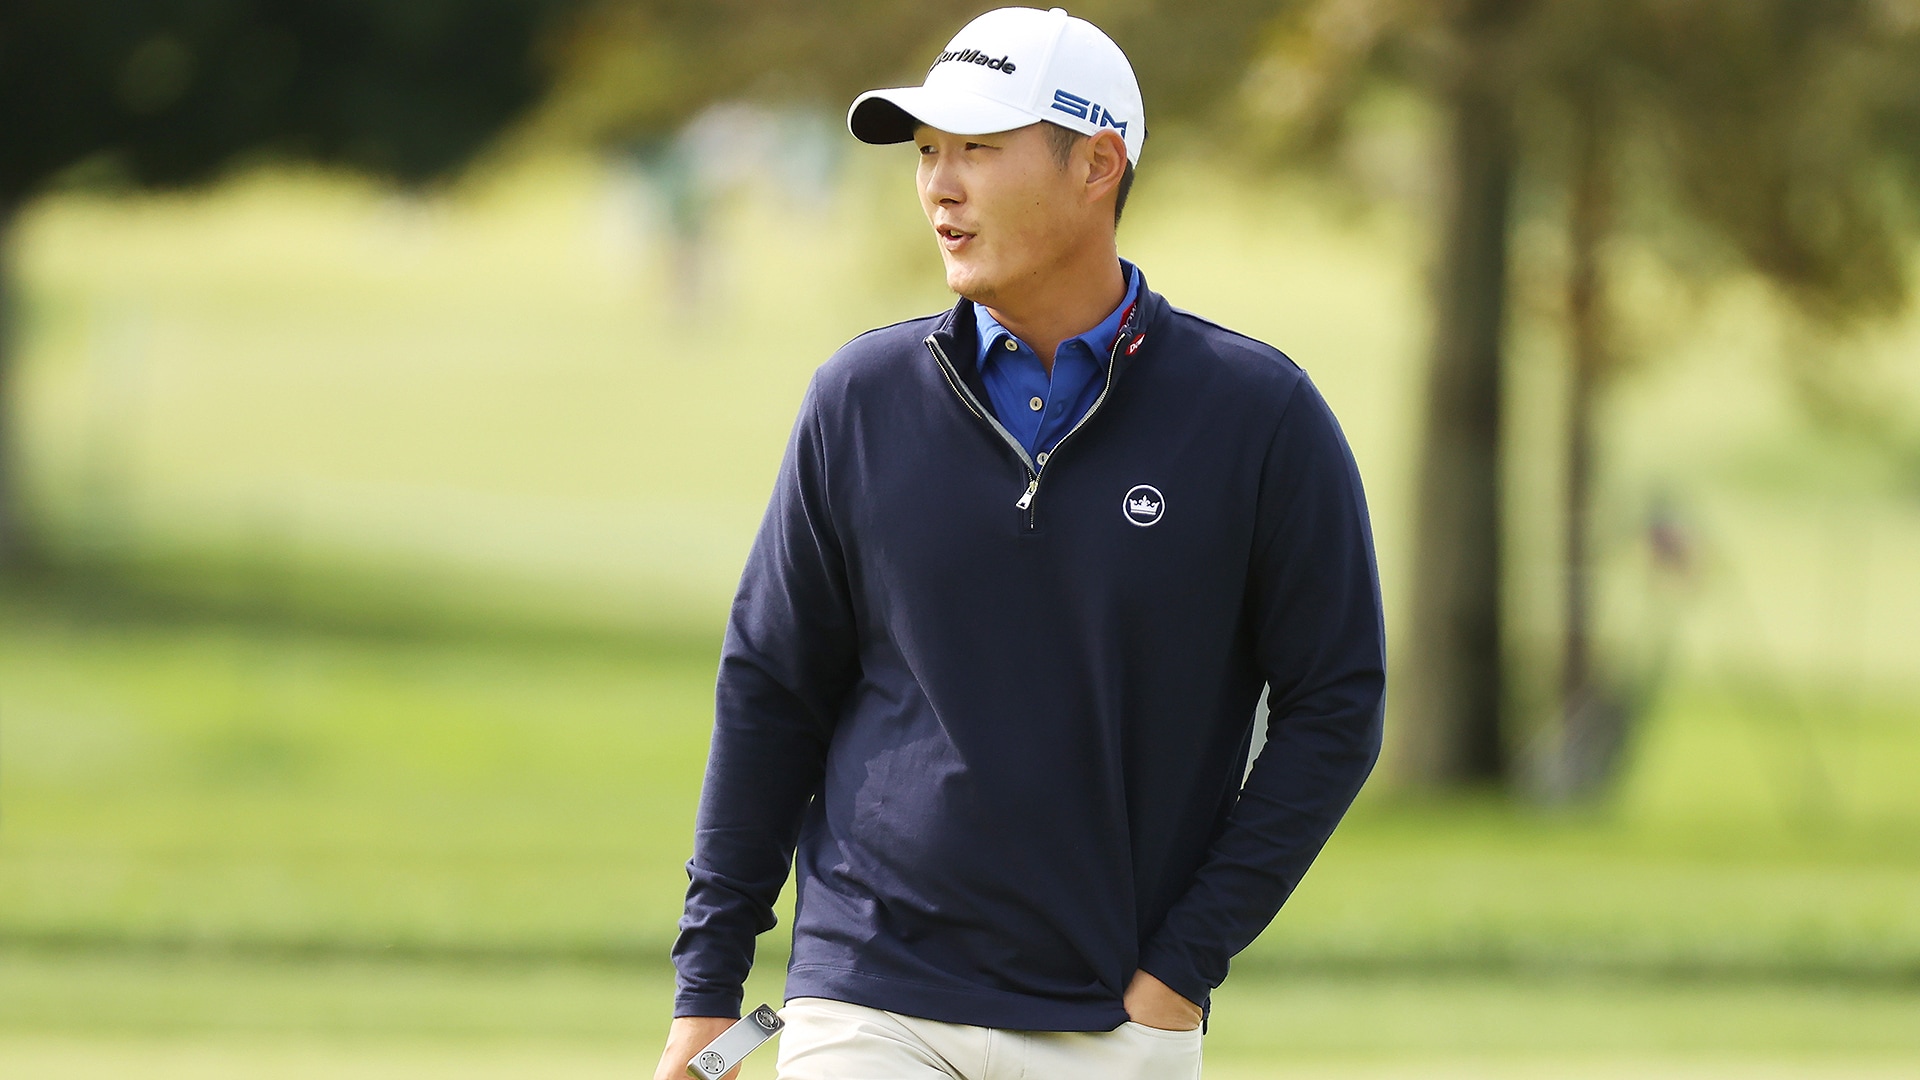 Watch: Frustrated Danny Lee 6-putts from 4 feet then withdraws from U.S. Open